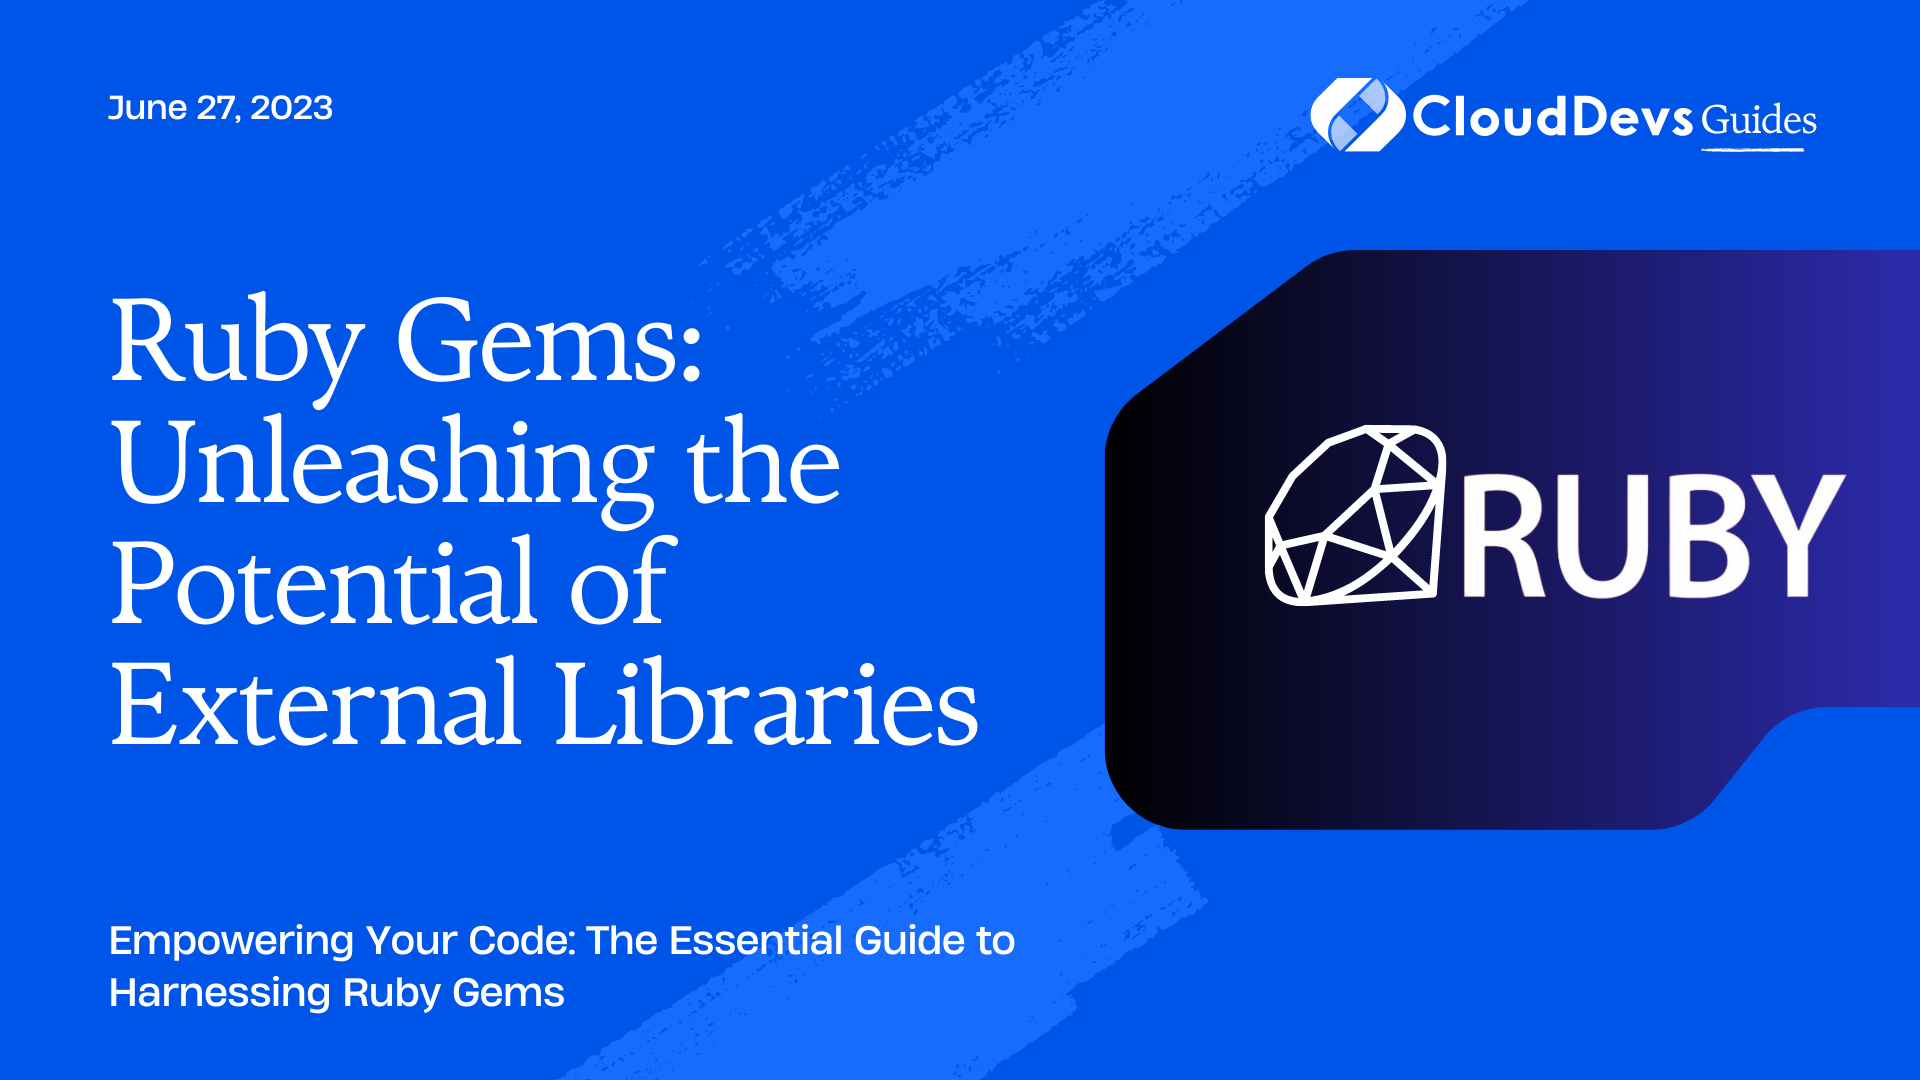 Ruby Gems: Unleashing the Potential of External Libraries